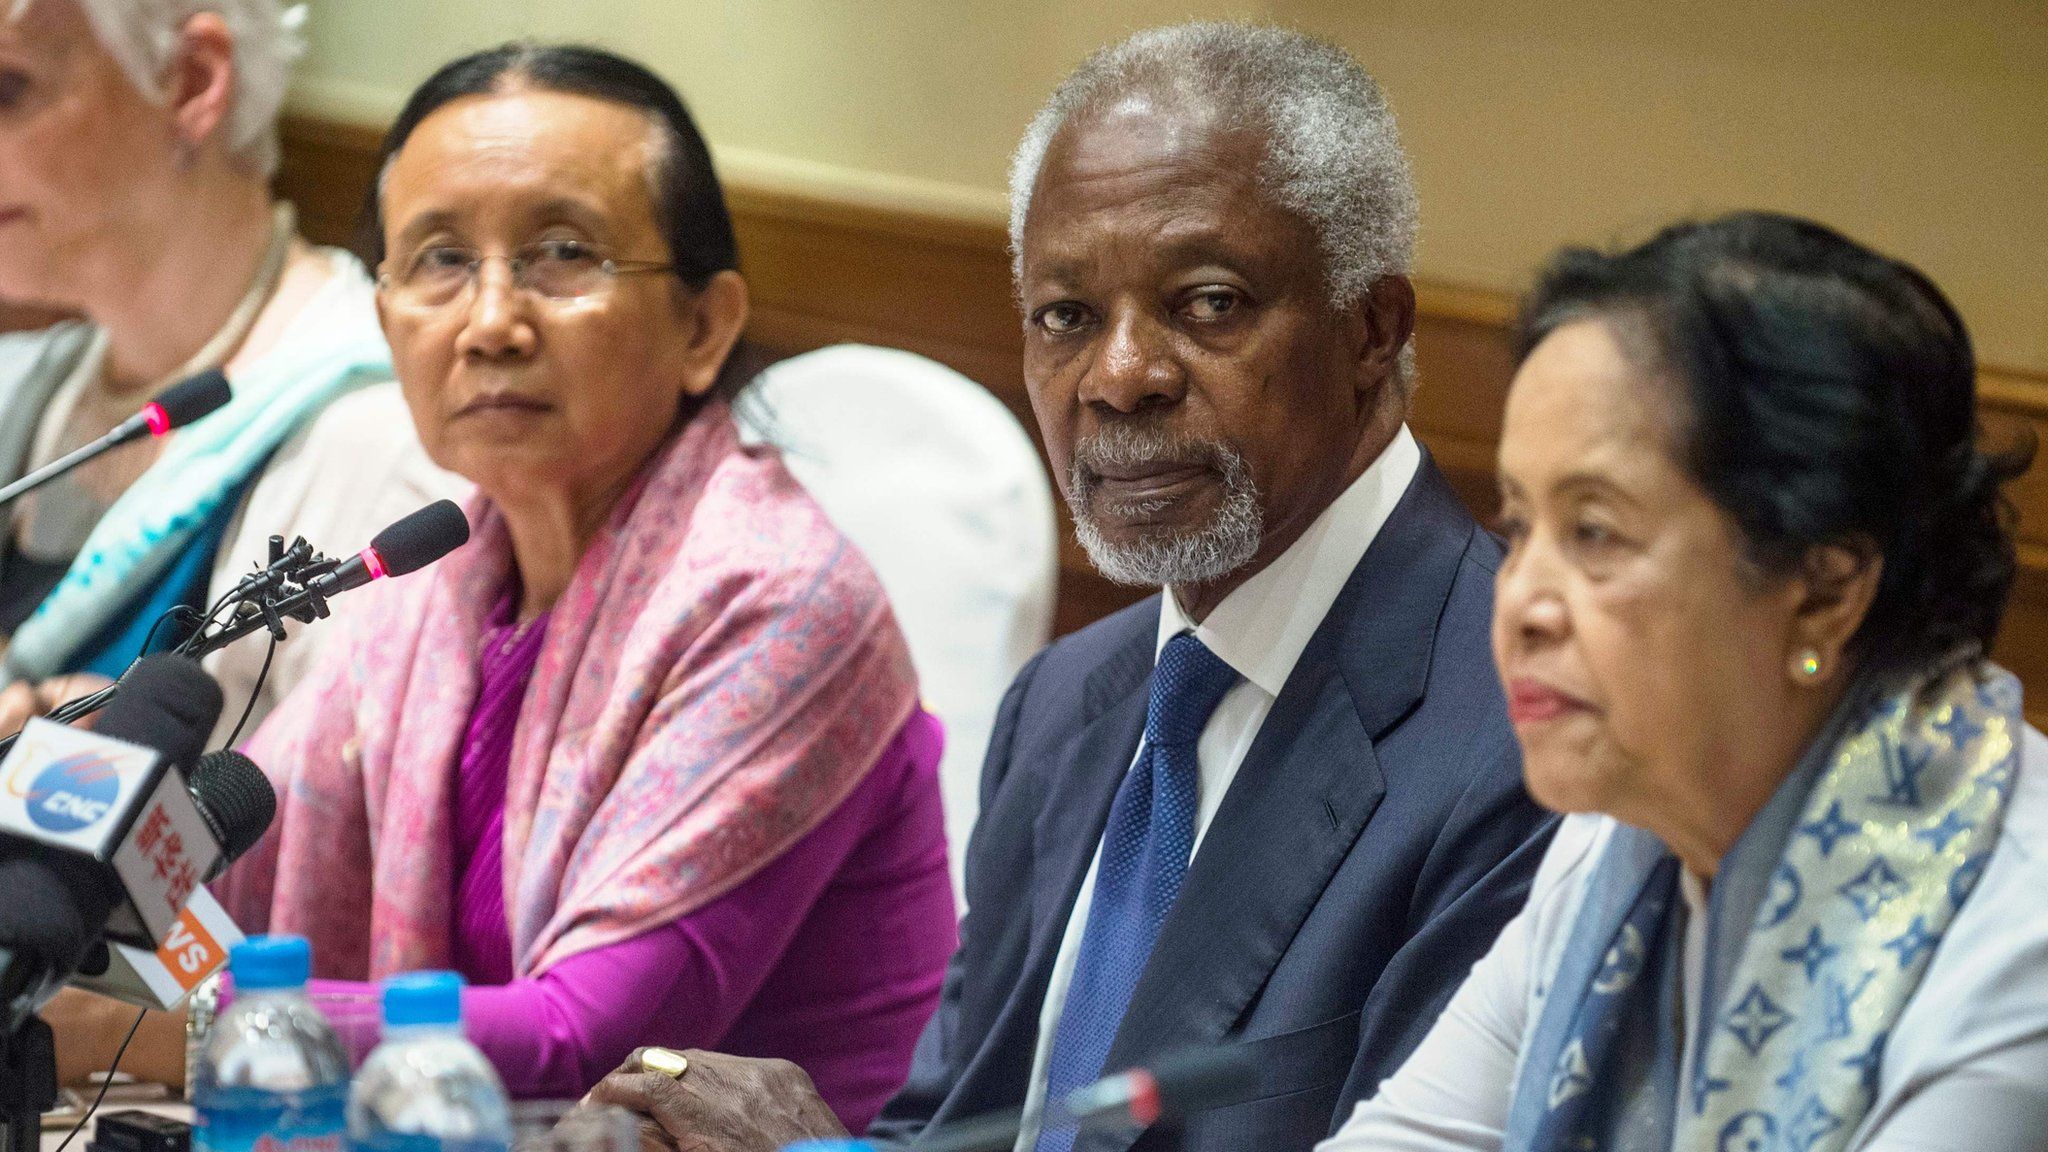 Former UN secretary-general Kofi Annan, head of the nine-member multi-sector advisory commission on Myanmar"s Rakhine State, sits with commission members Laetitia Van Den Assum (L), Mya Thidar (2nd L) and Saw Khin Tint (R) during a press conference in Yangon on December 6, 201